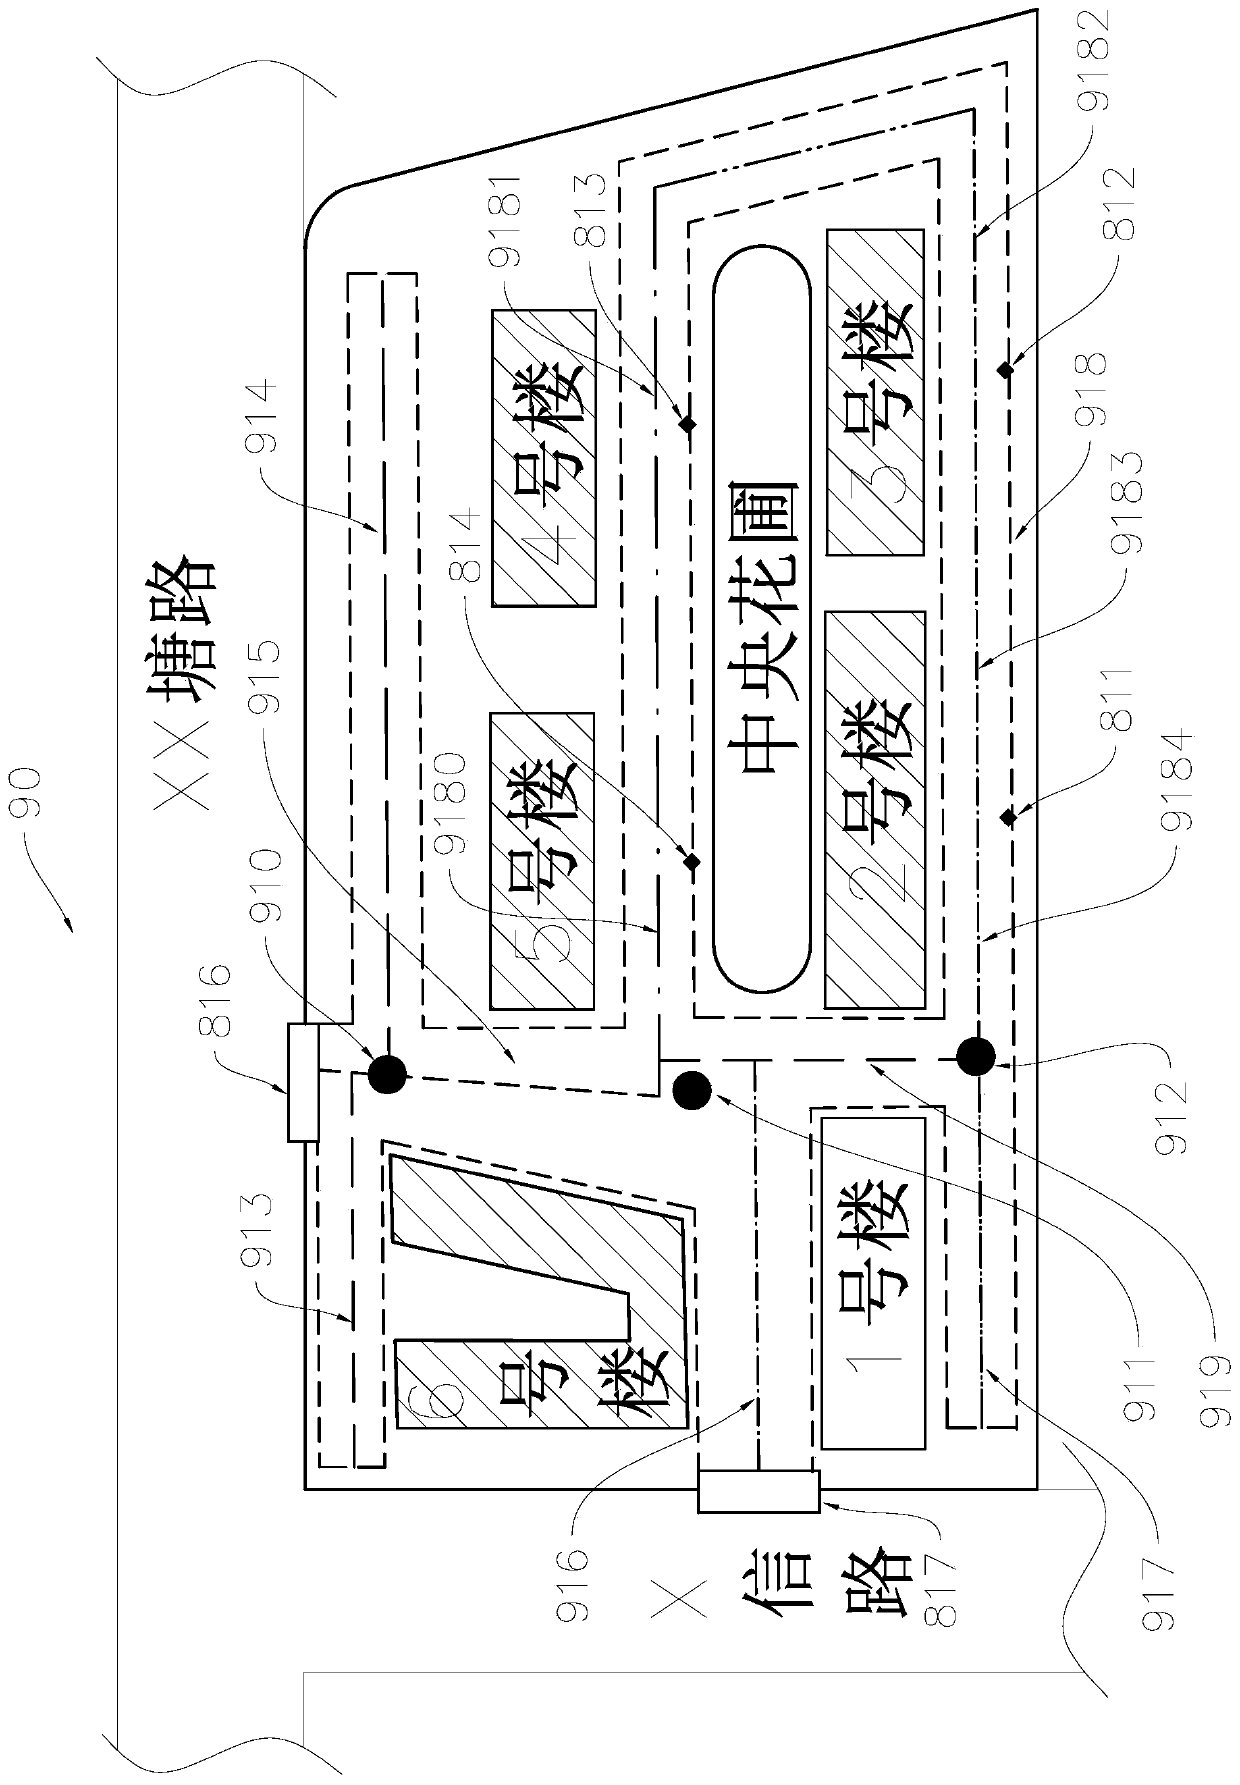 Monitoring method and monitoring device for fire fighting access as well as fire fighting access system